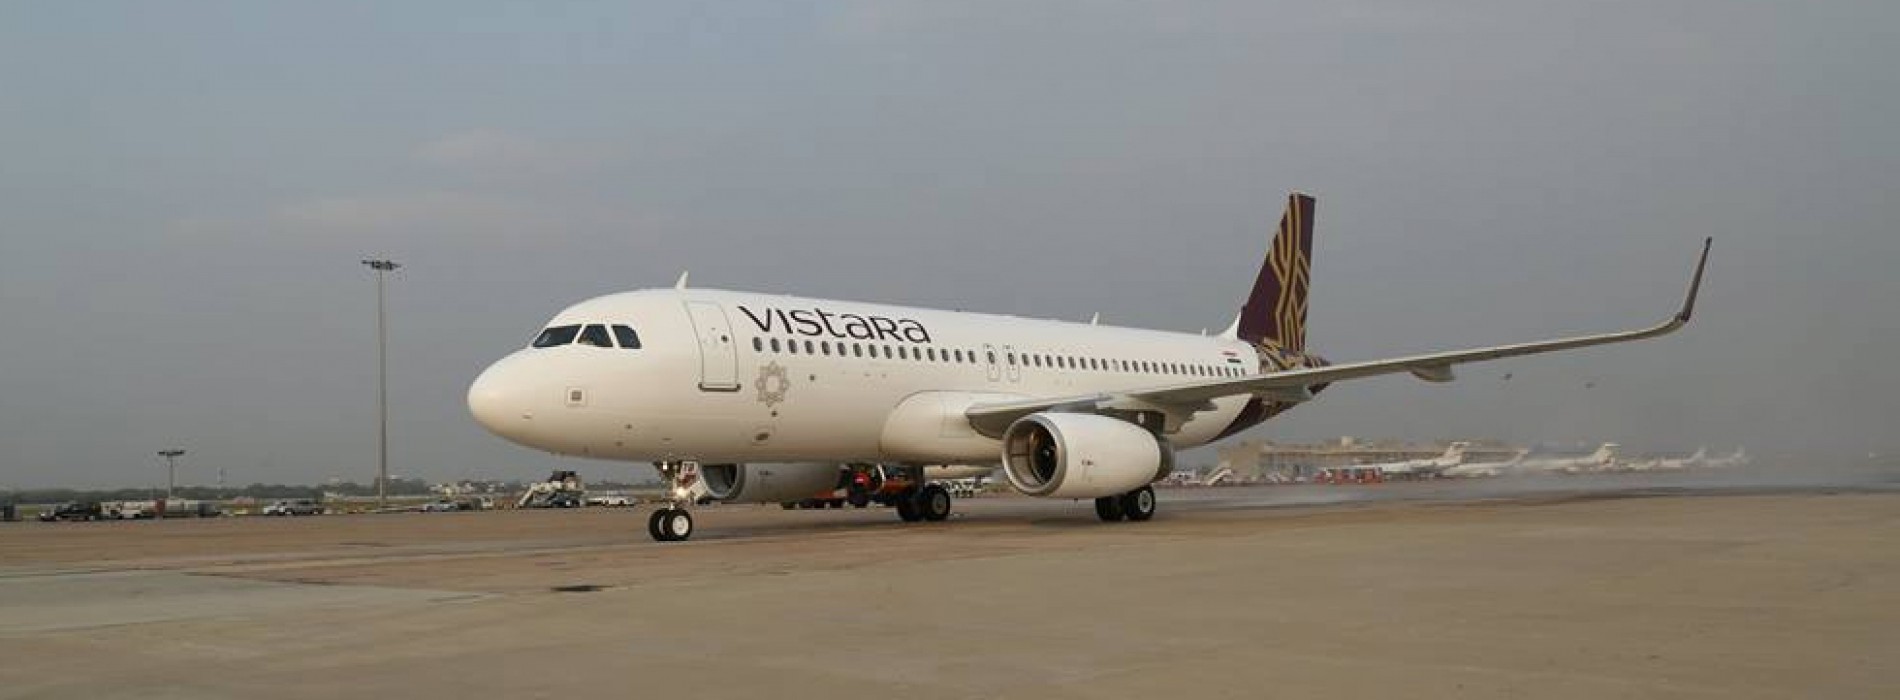 Vistara announces Holi sale with fares starting at Rs 999